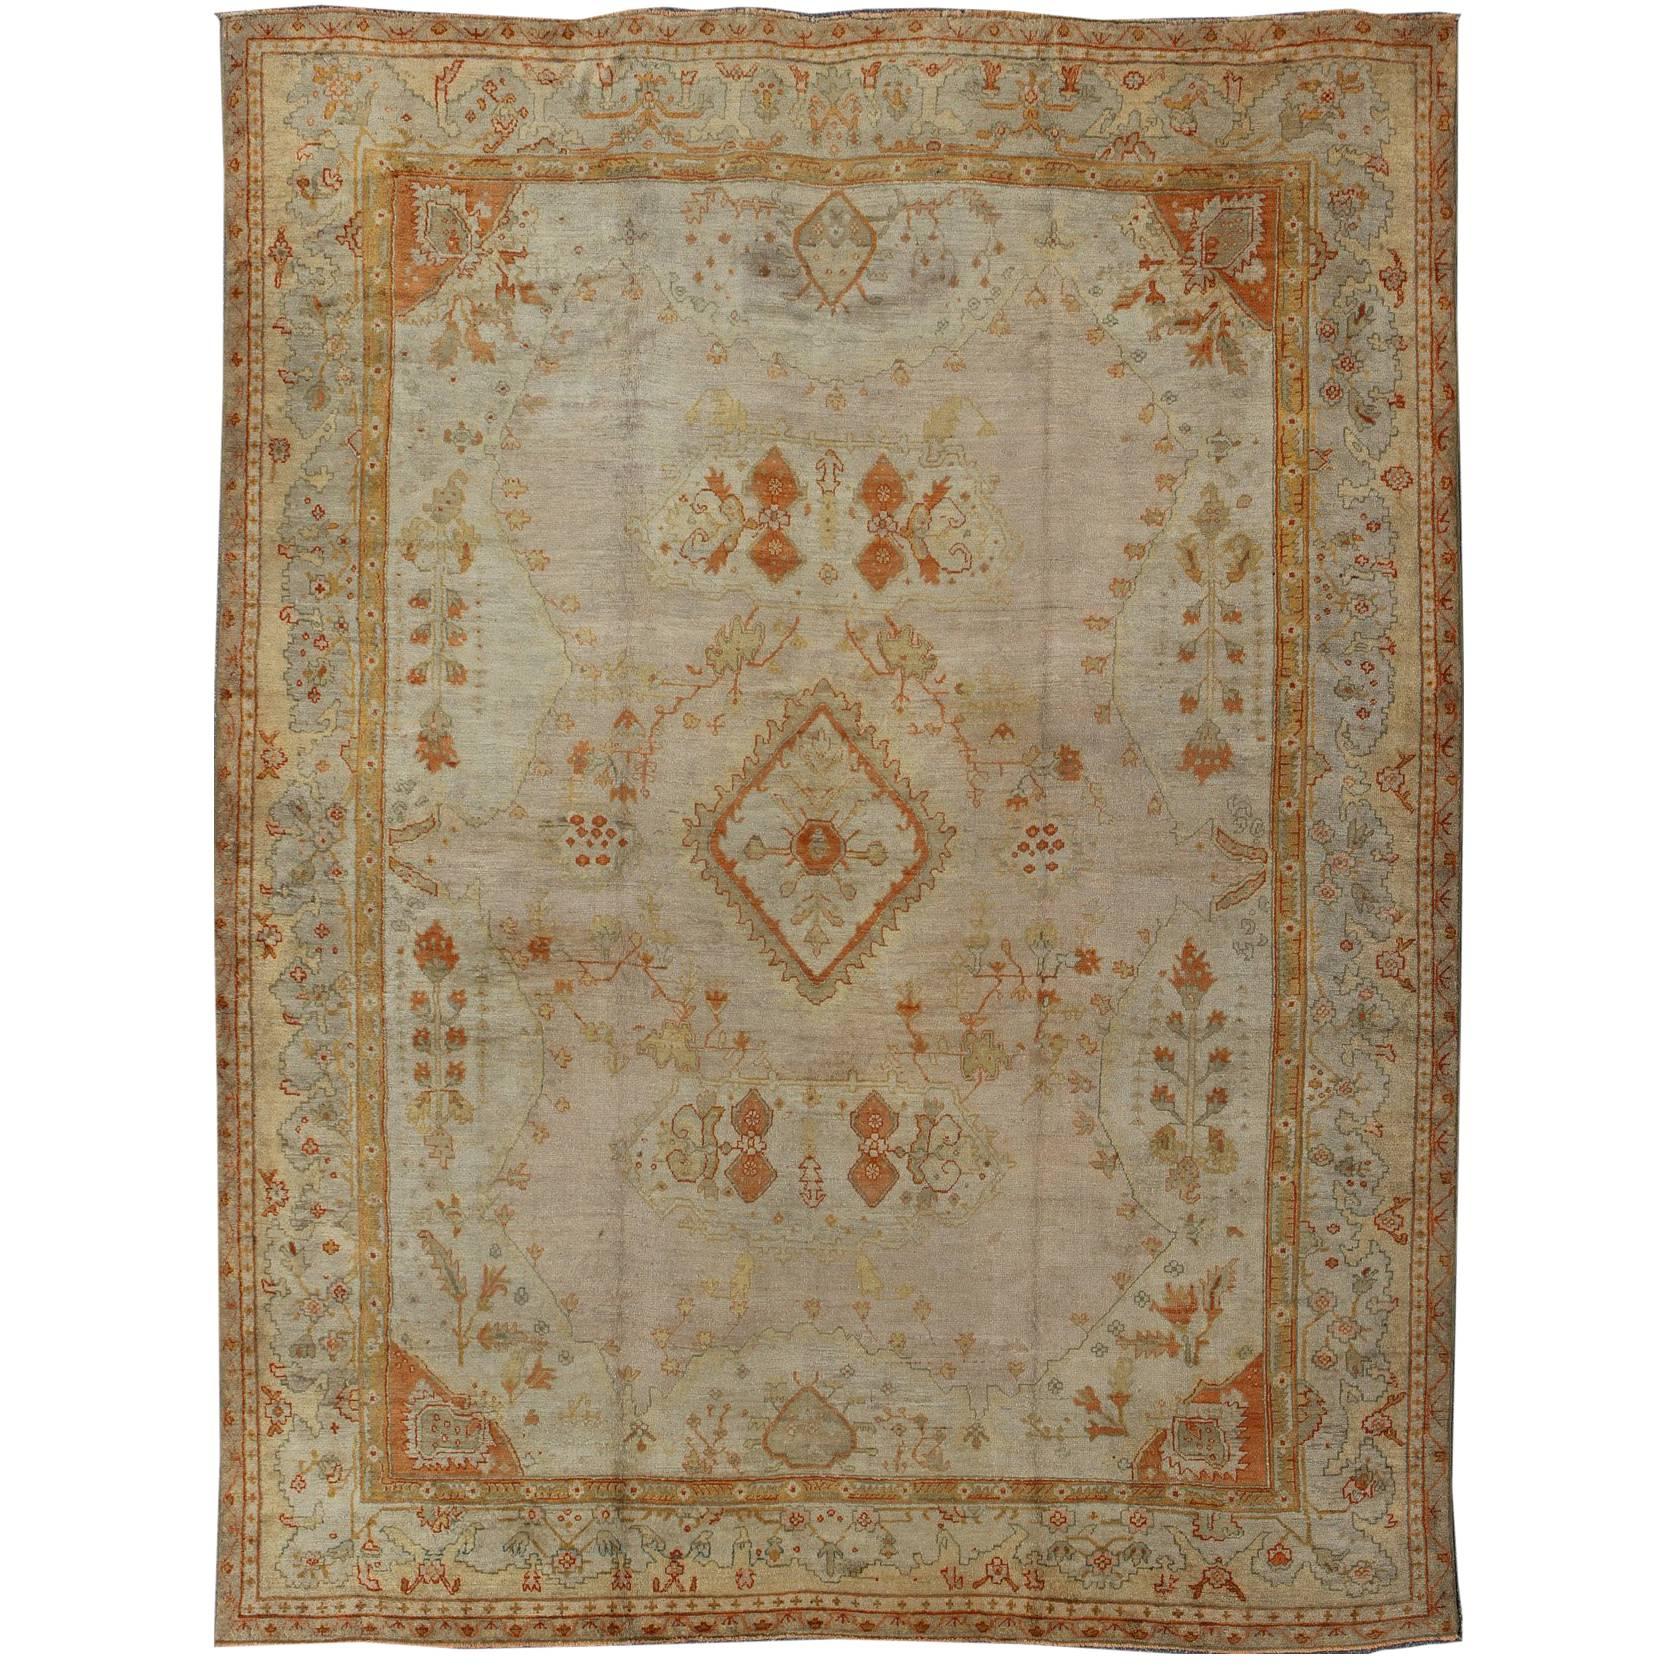 Antique Turkish Oushak Rug in green, Yellow, blush, apricot and light blue